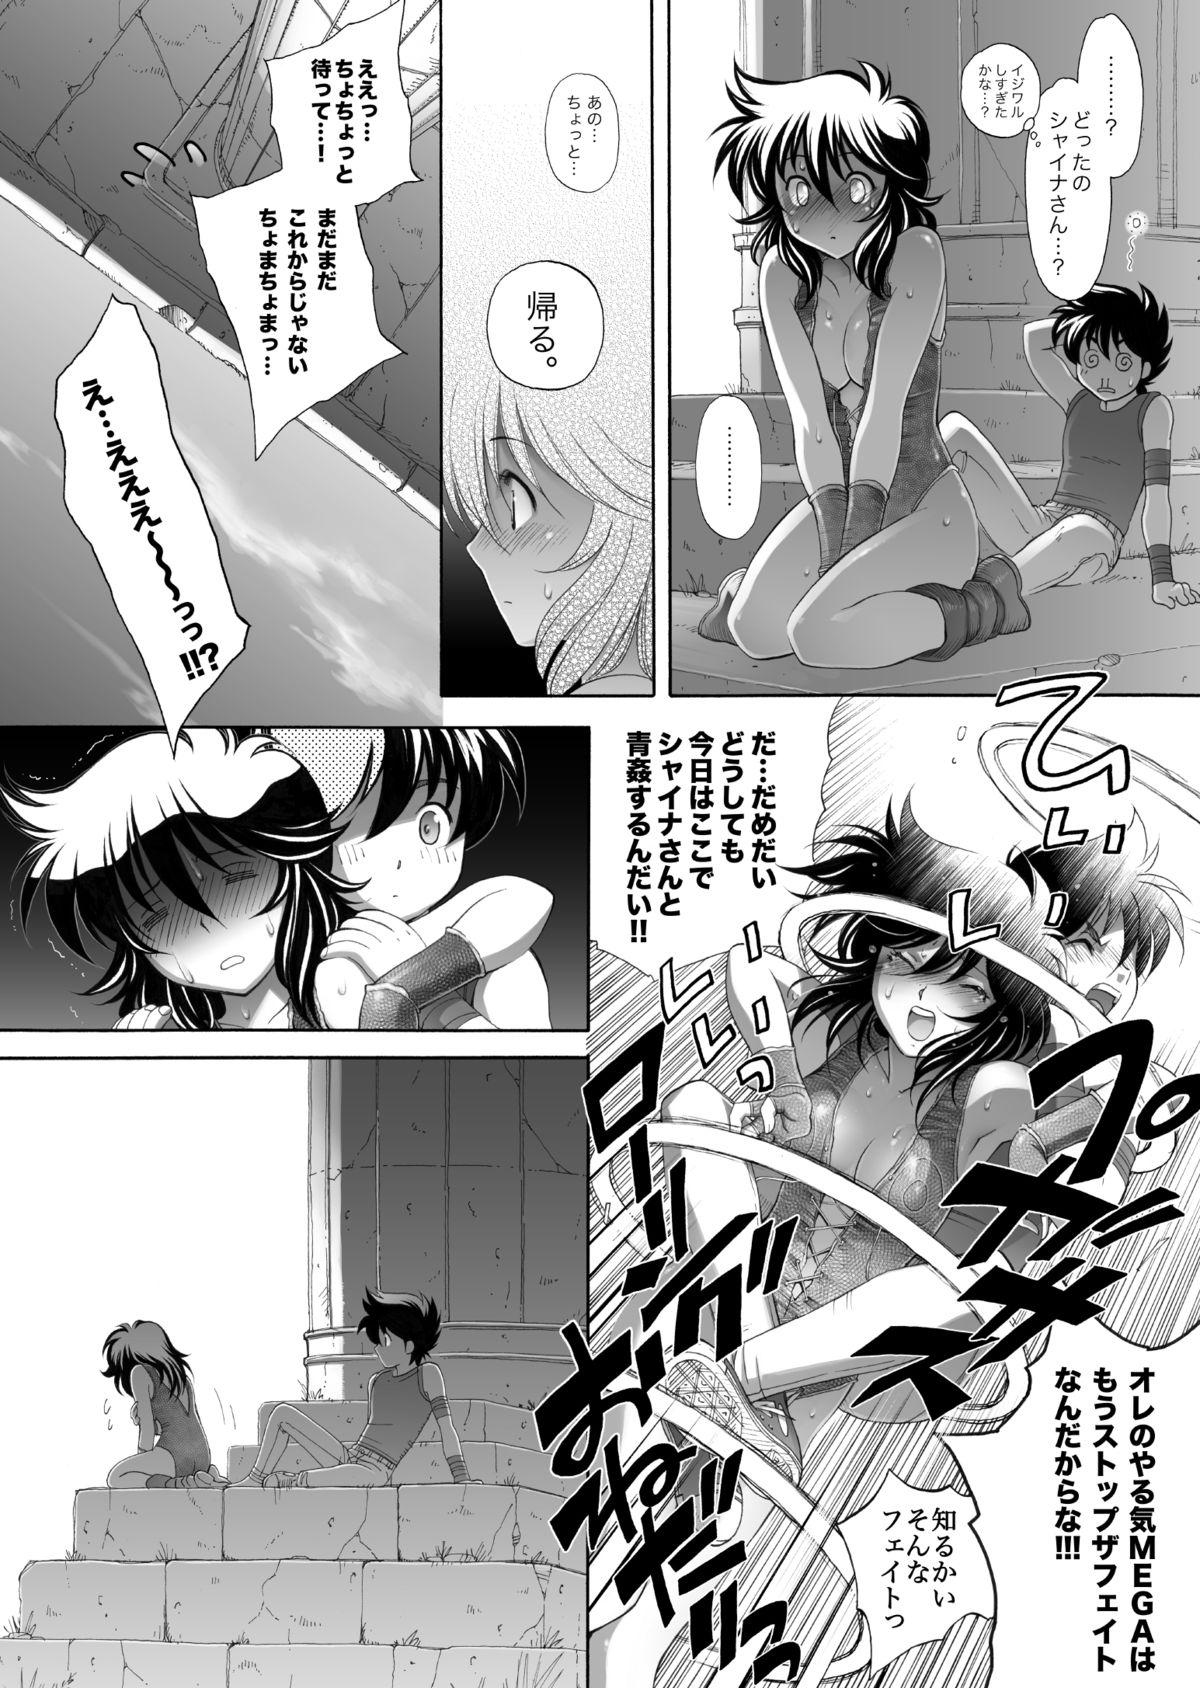 Oiled S.I.S.I.O.K.N.M.A. II - Saint seiya Tight Pussy - Page 11